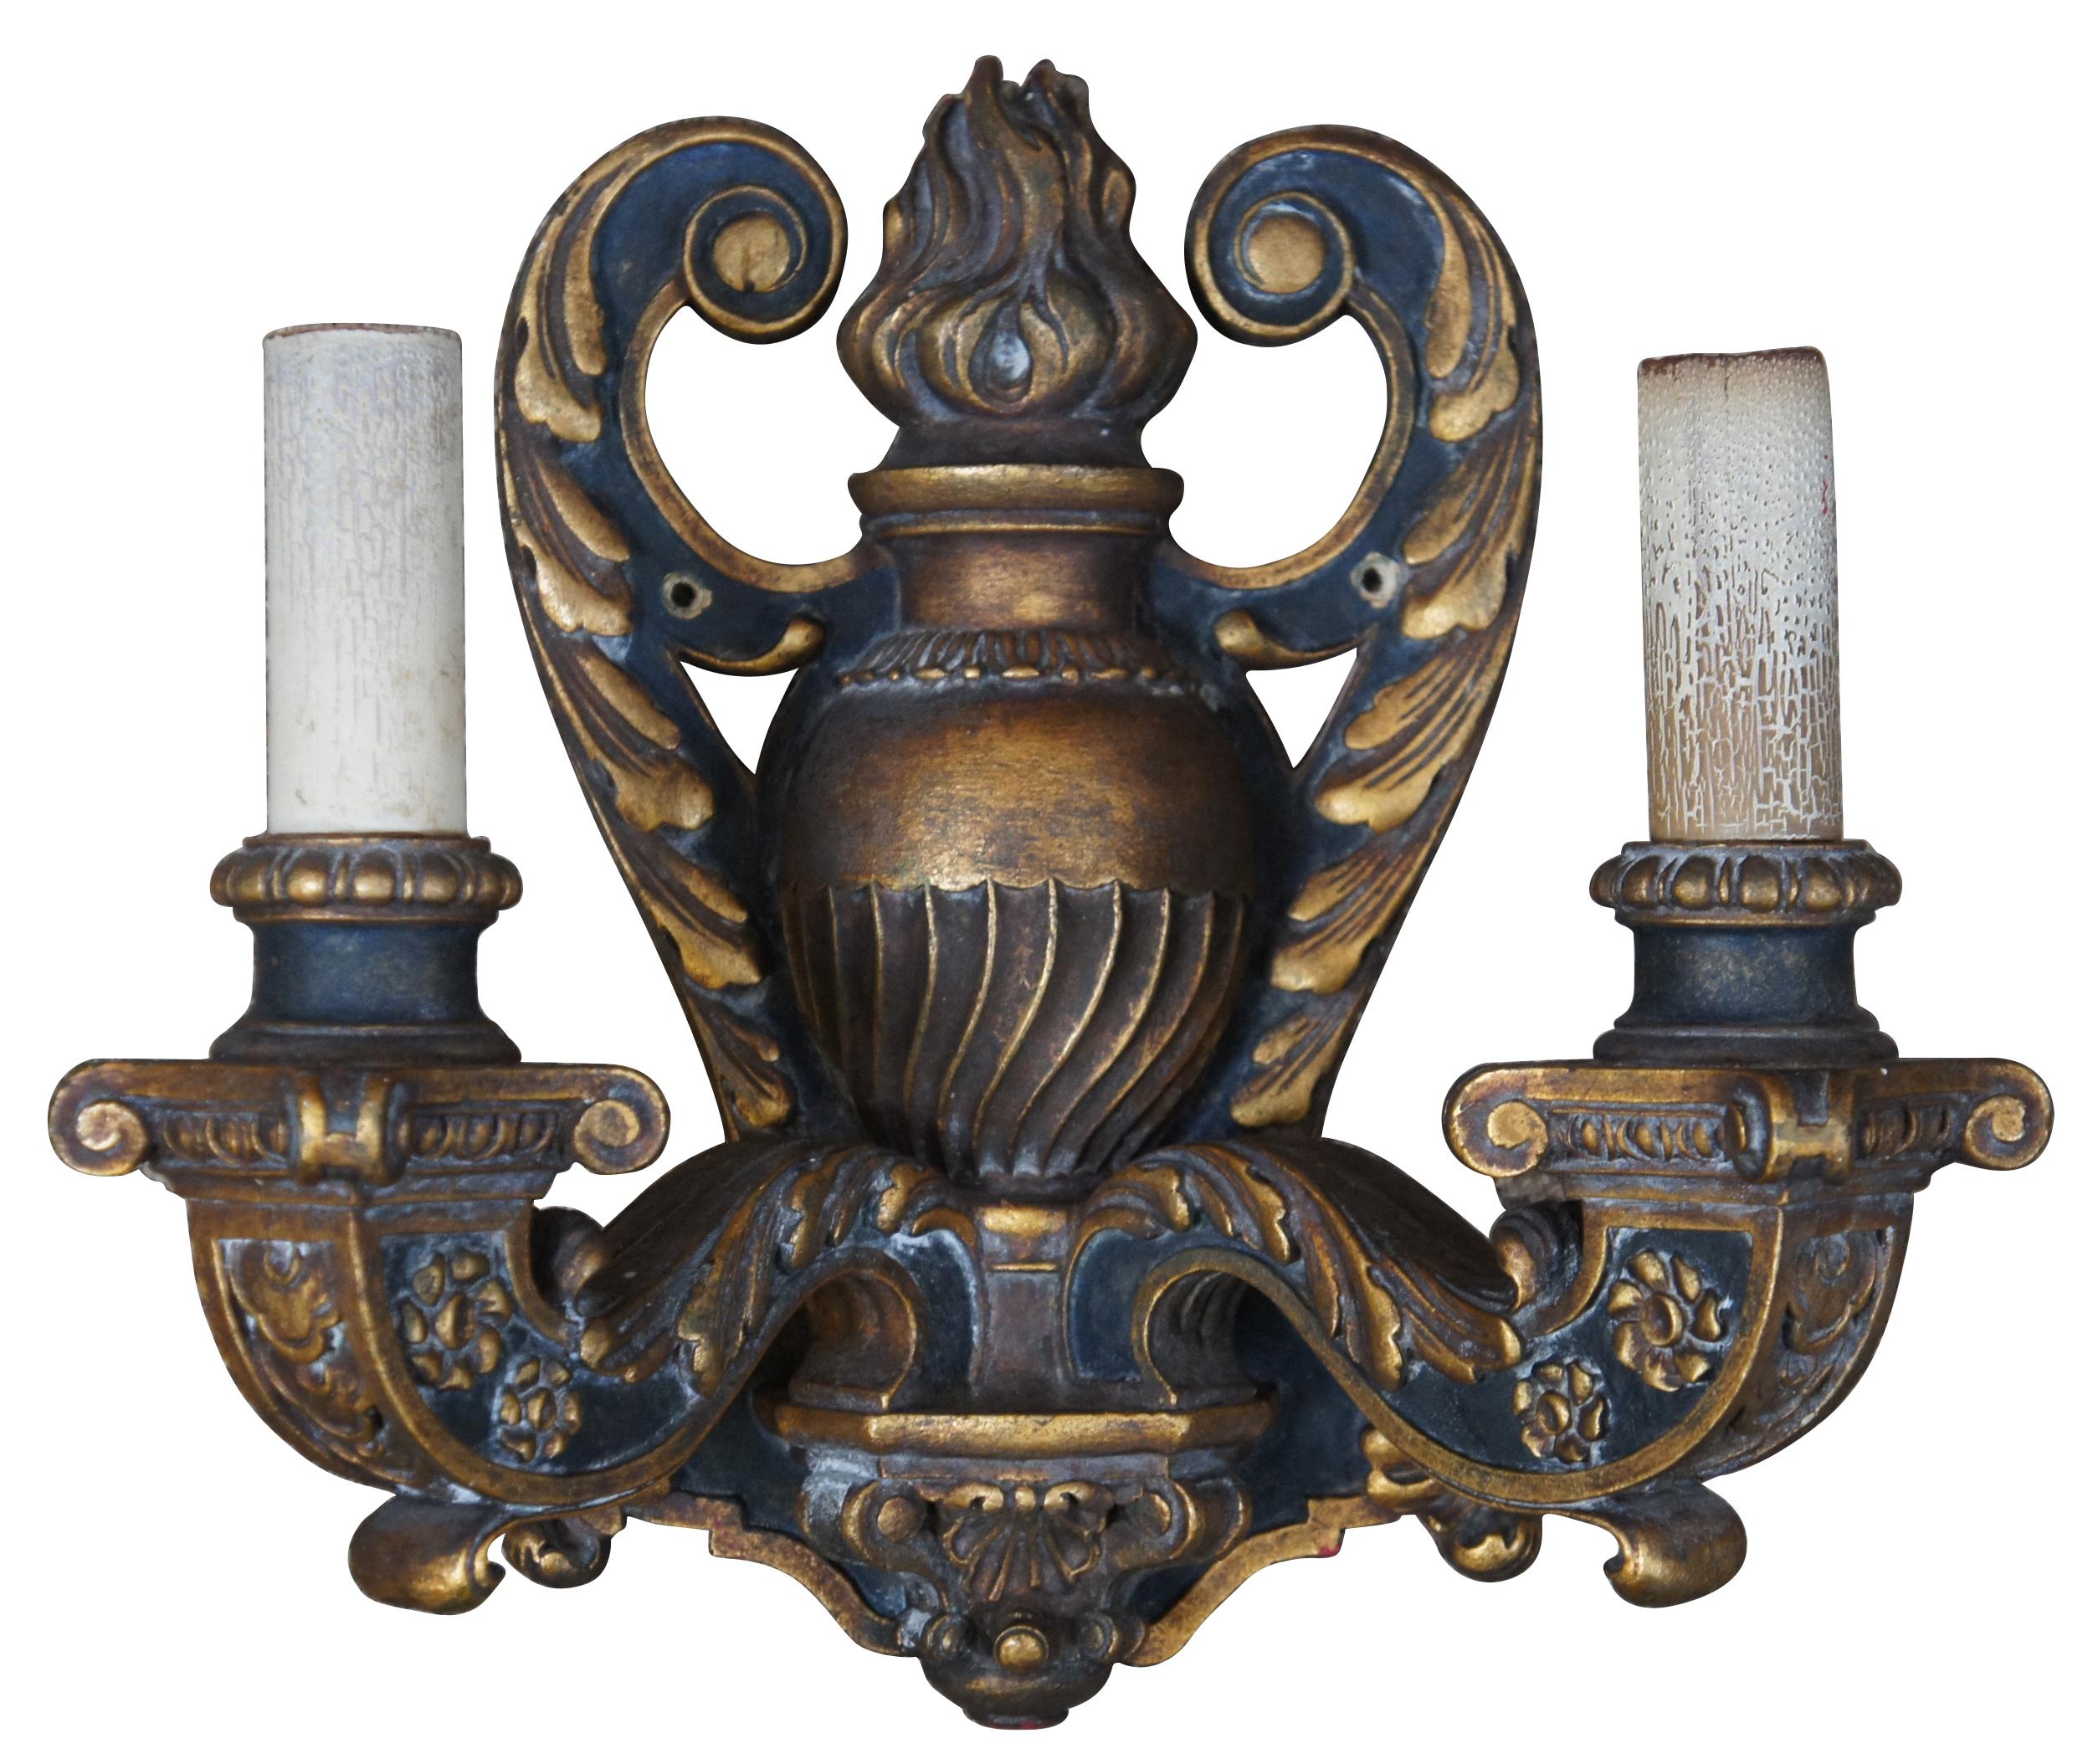 Baroque revival electrified wall sconces, circa 1910. A two arm candelabra shape with candlesticks decorated with leaves and flowers around a central flaming urn. Made from wood with a black and gold (dore) finish.